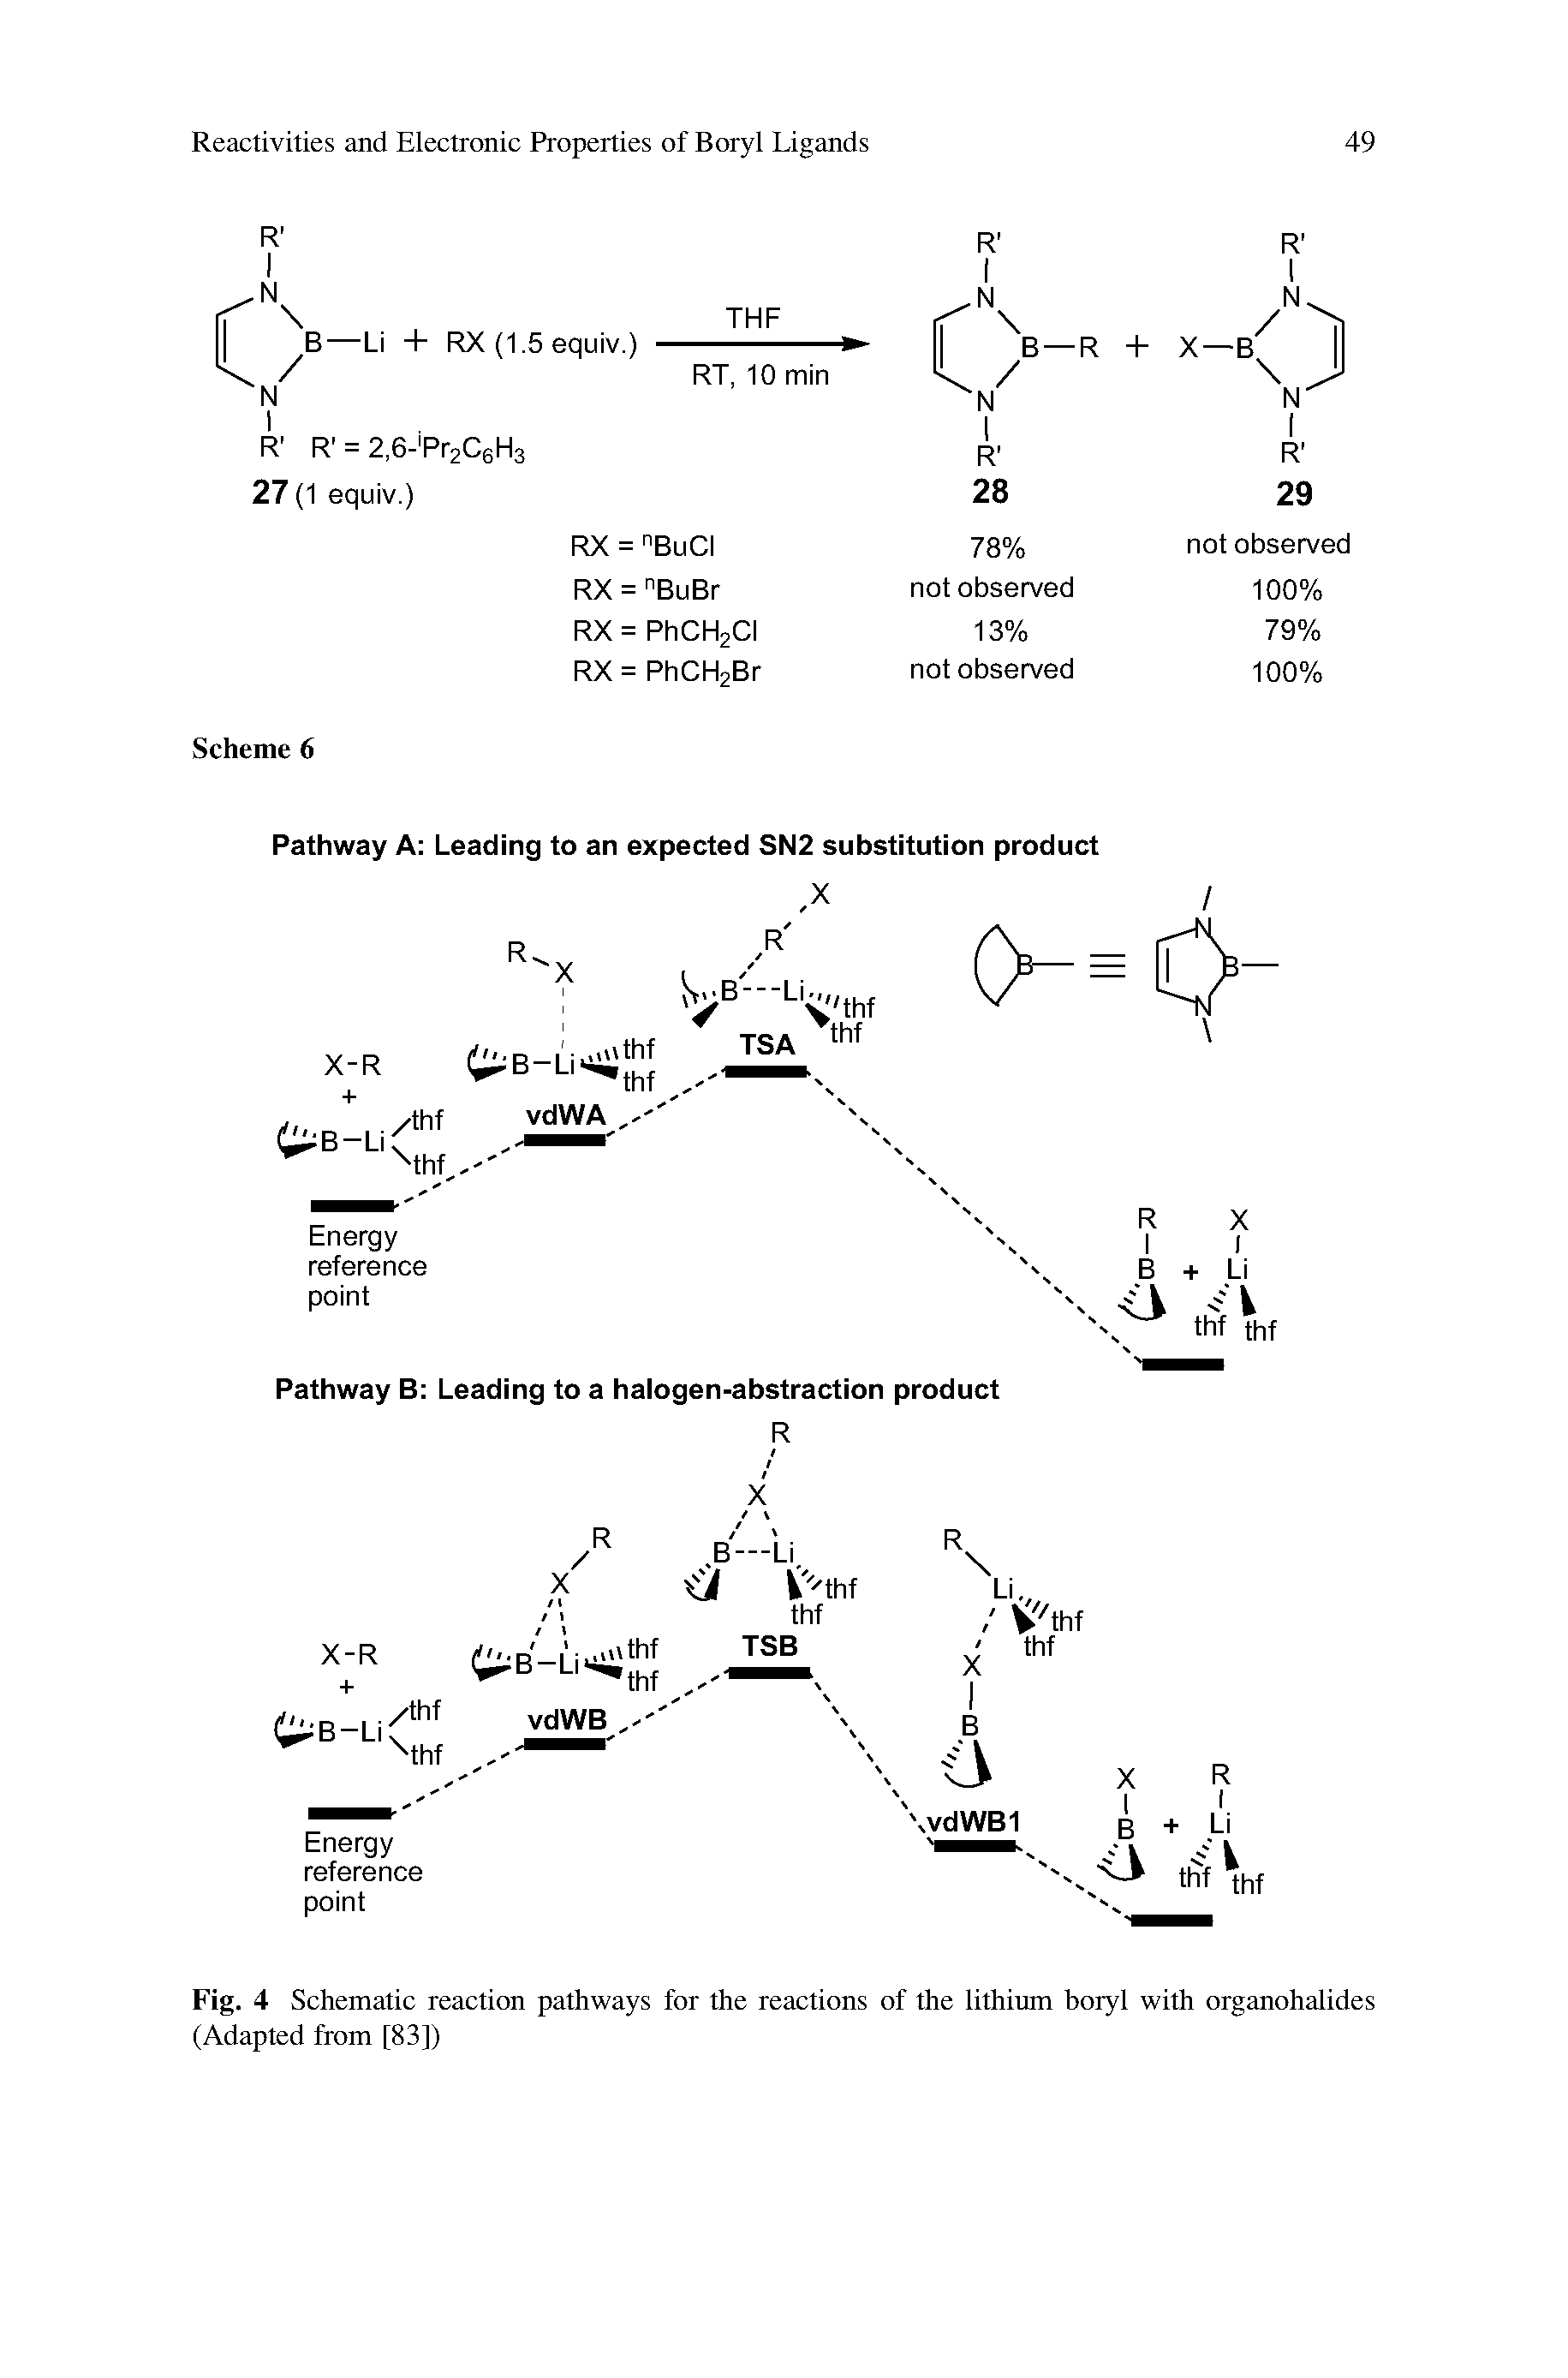 Fig. 4 Schematic reaction pathways for the reactions of the lithium boryl with organohalides (Adapted from [83])...